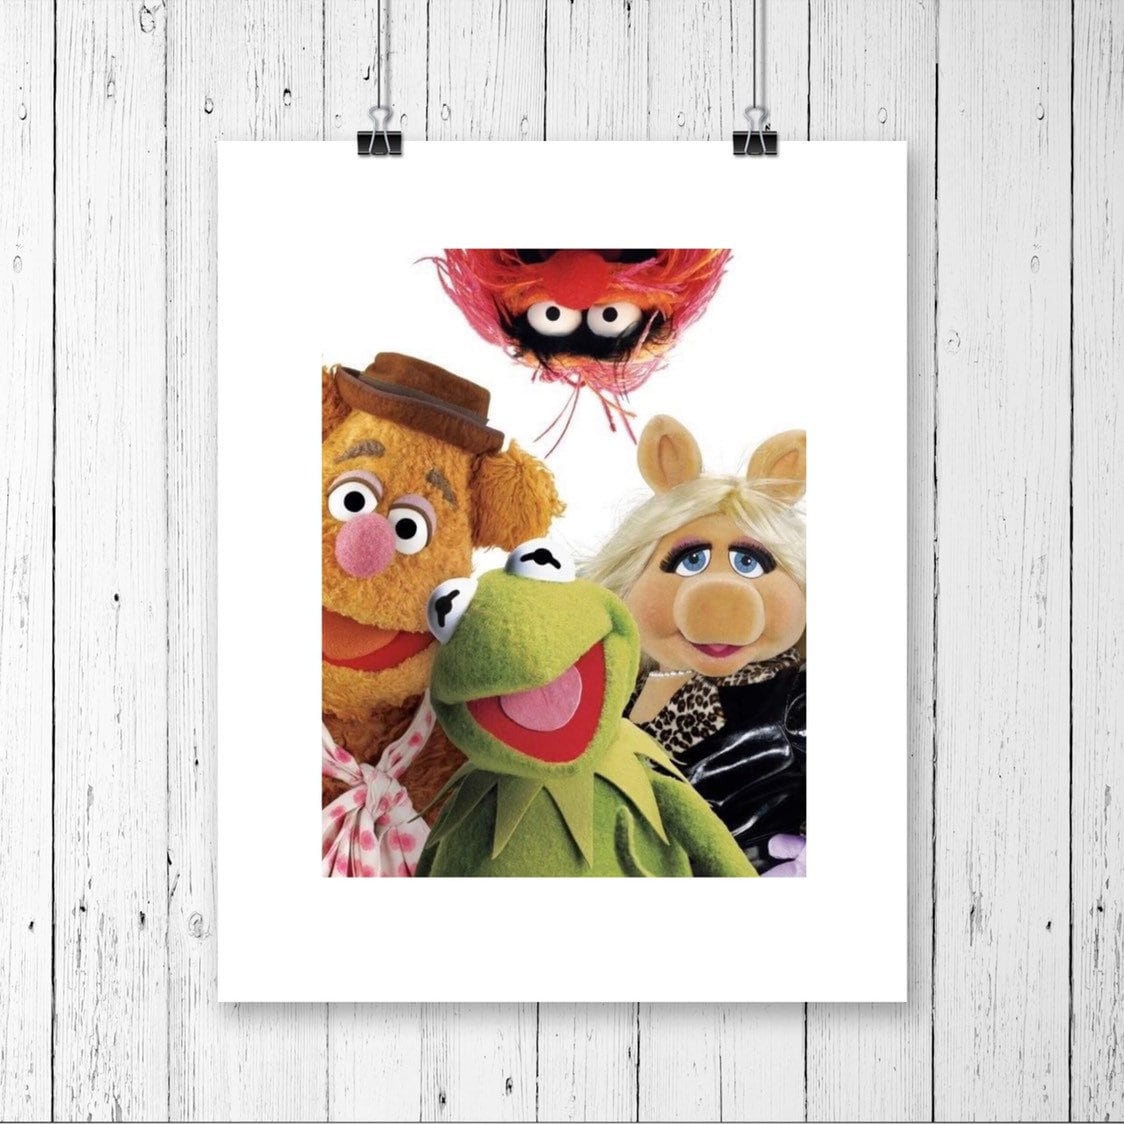 Miss Piggy Photo: Miss Piggy  Miss piggy, Miss piggy muppets, Kermit and  miss piggy